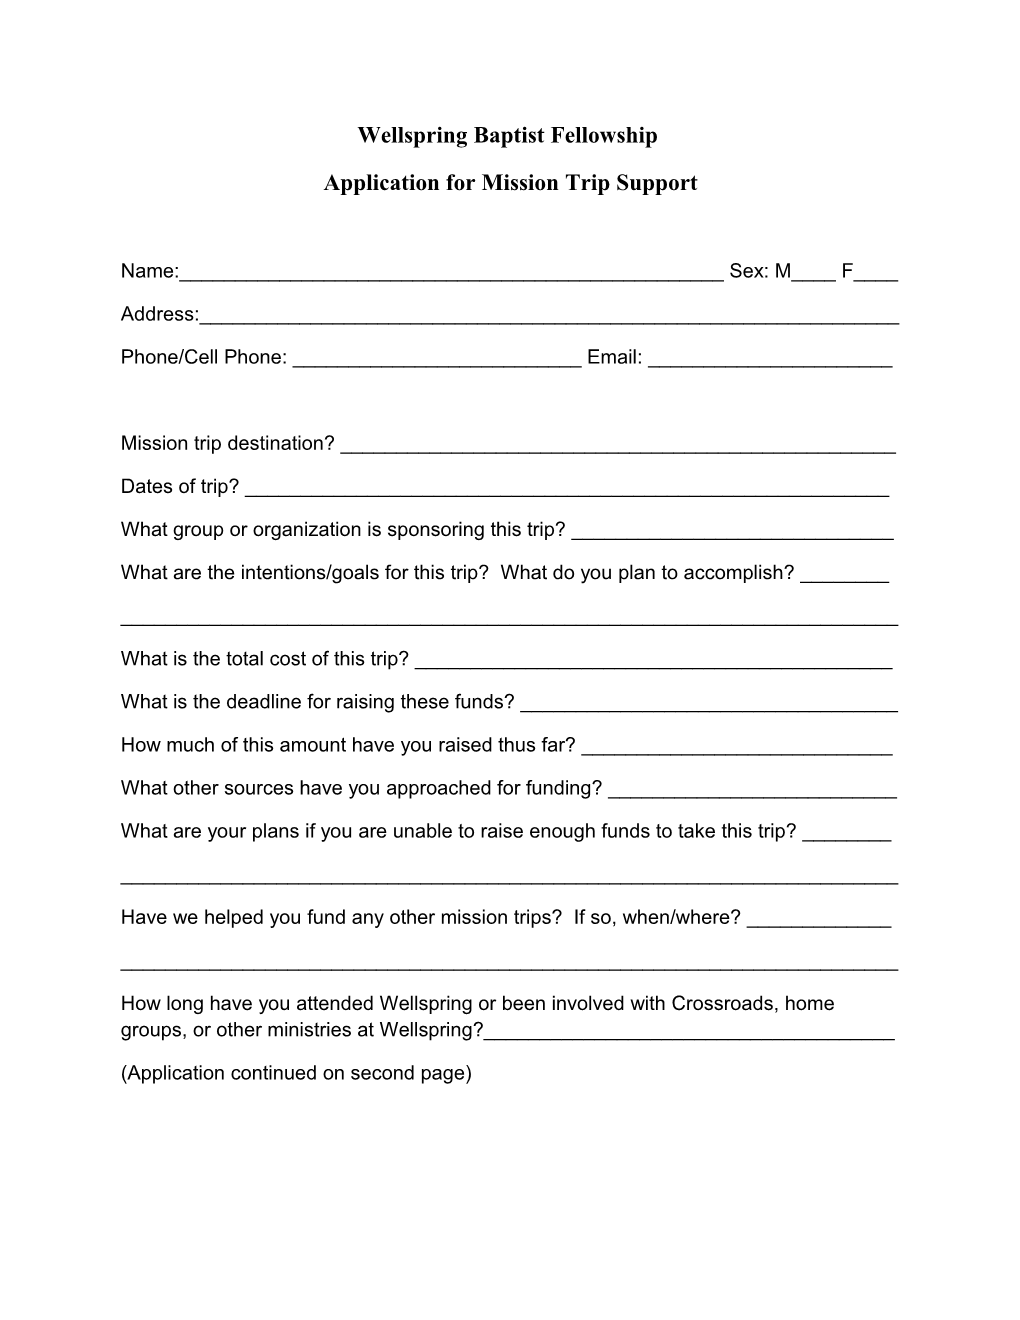 Application for Mission Trip Support